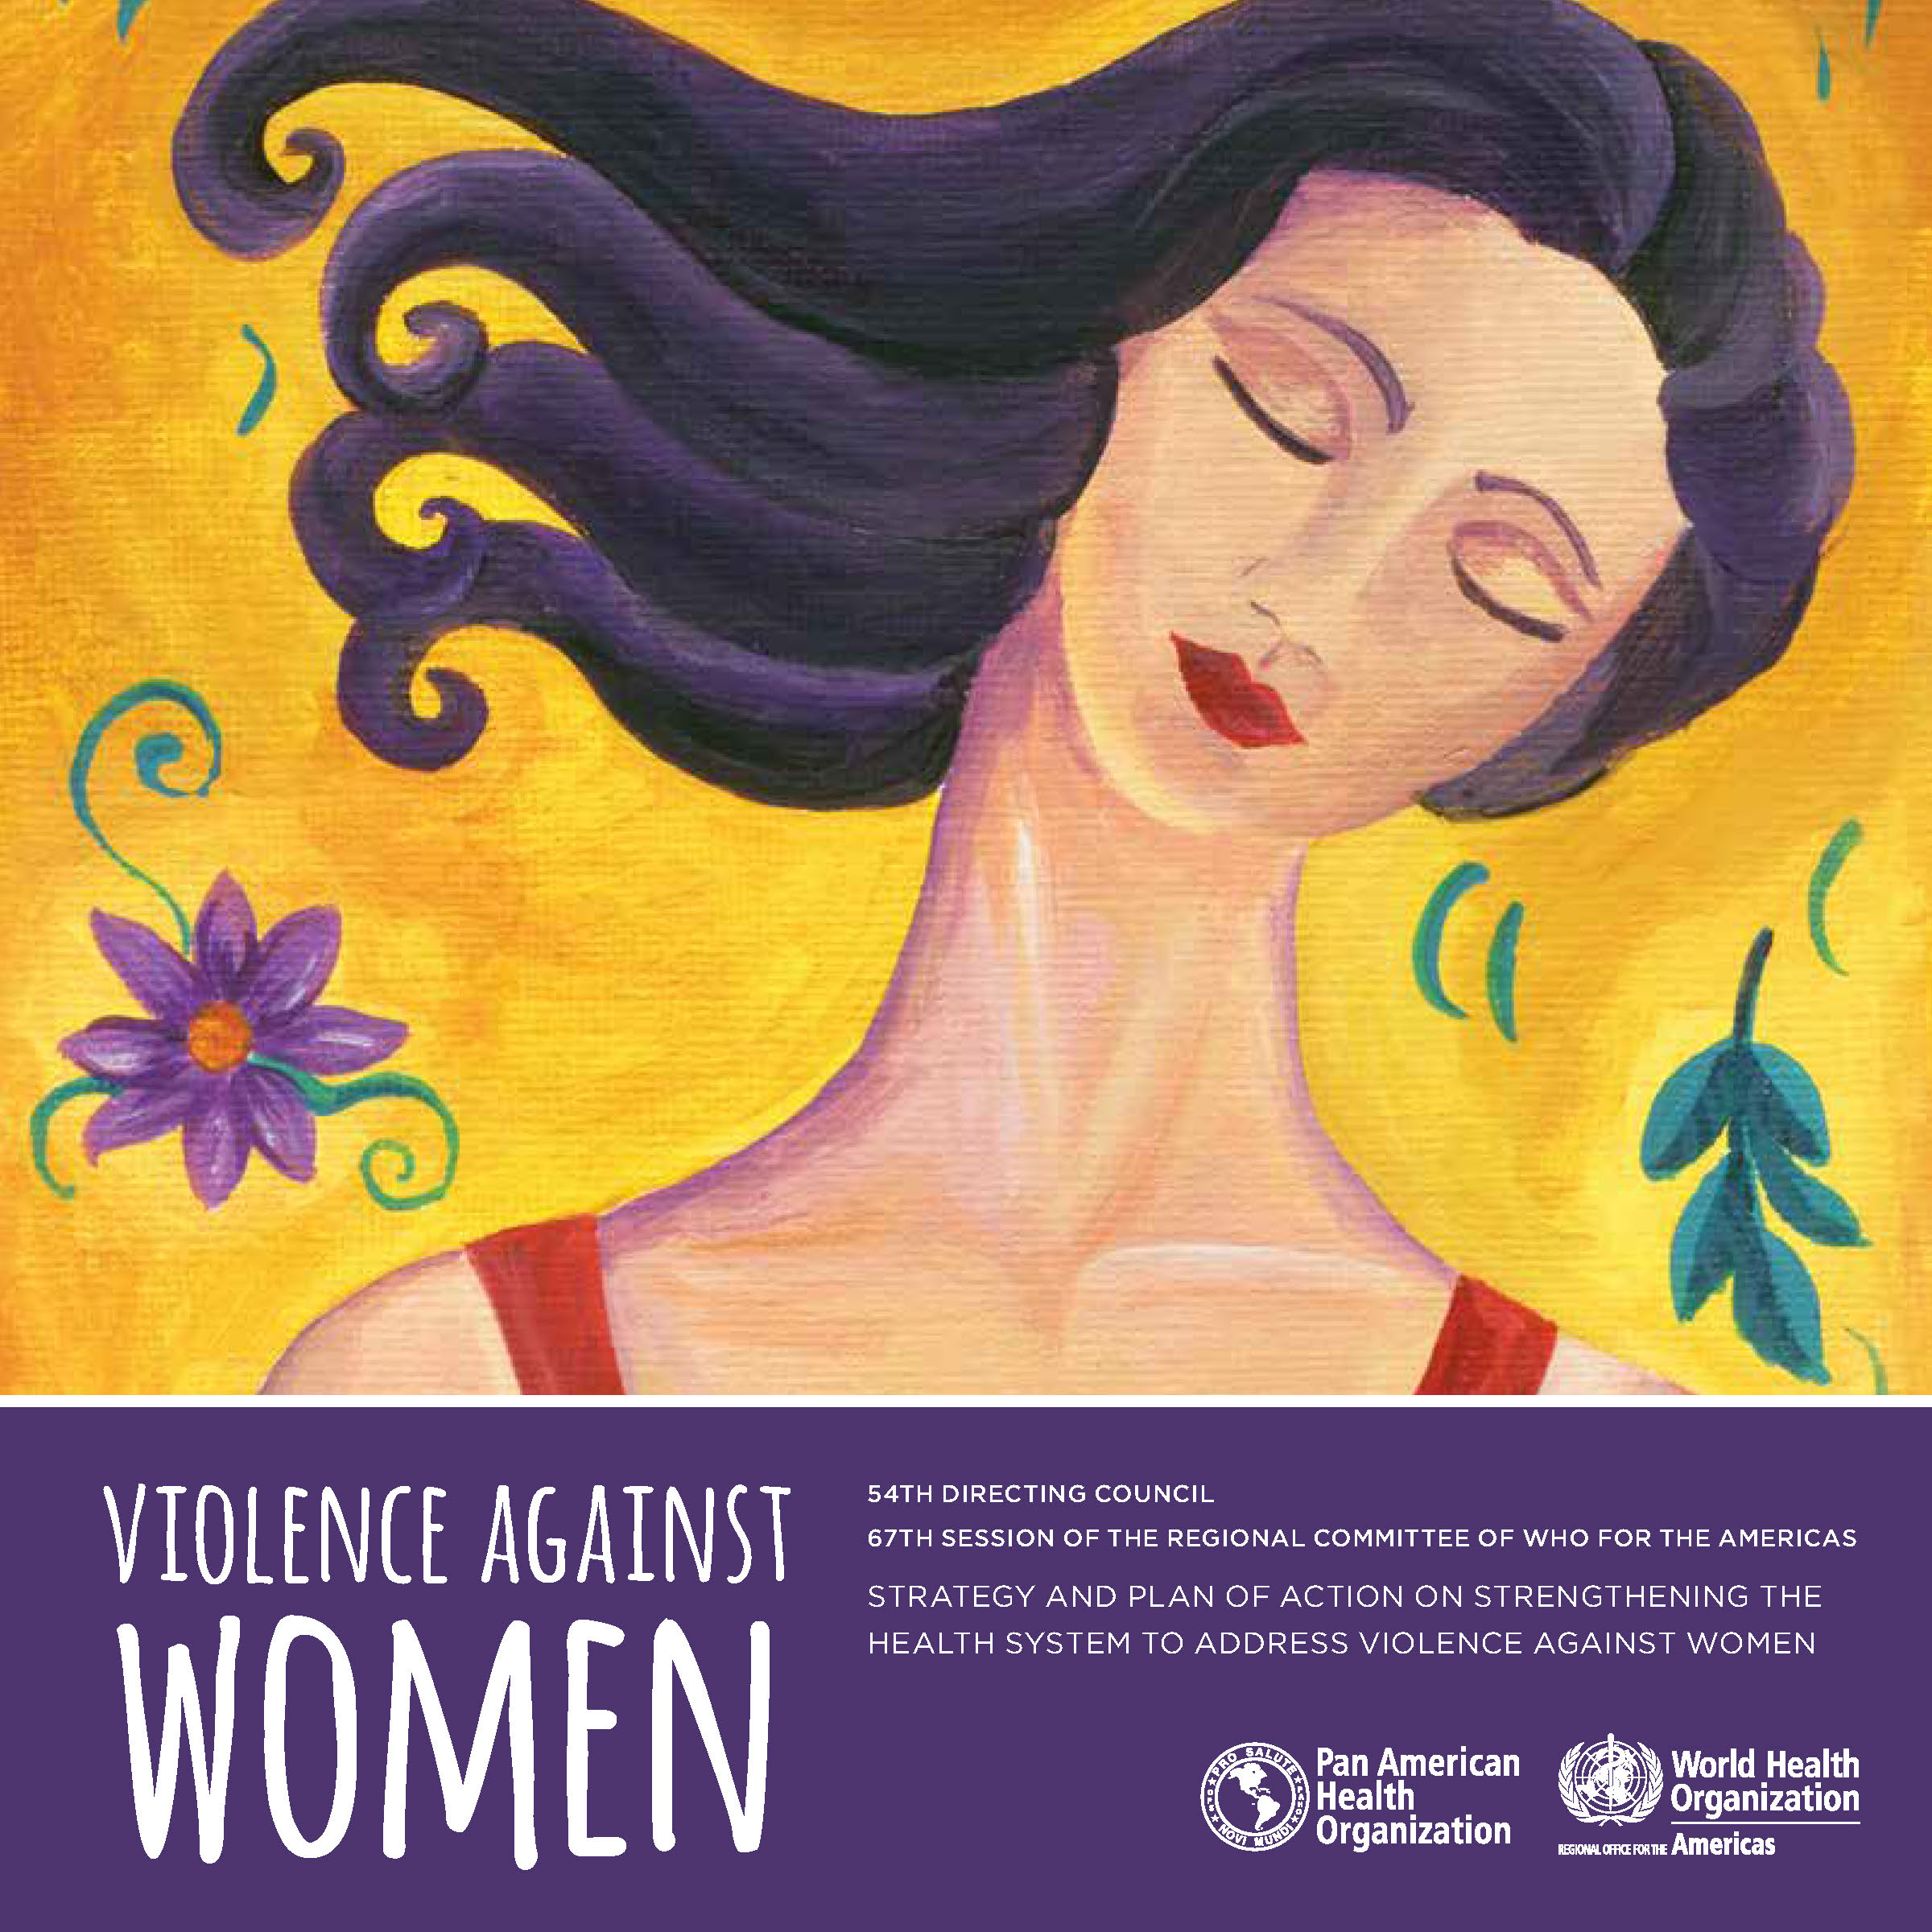 STRATEGY AND PLAN OF ACTION ON STRENGTHENING THE HEALTHY SYSTEM TO ADDRESS VIOLENCE AGAINST WOMEN